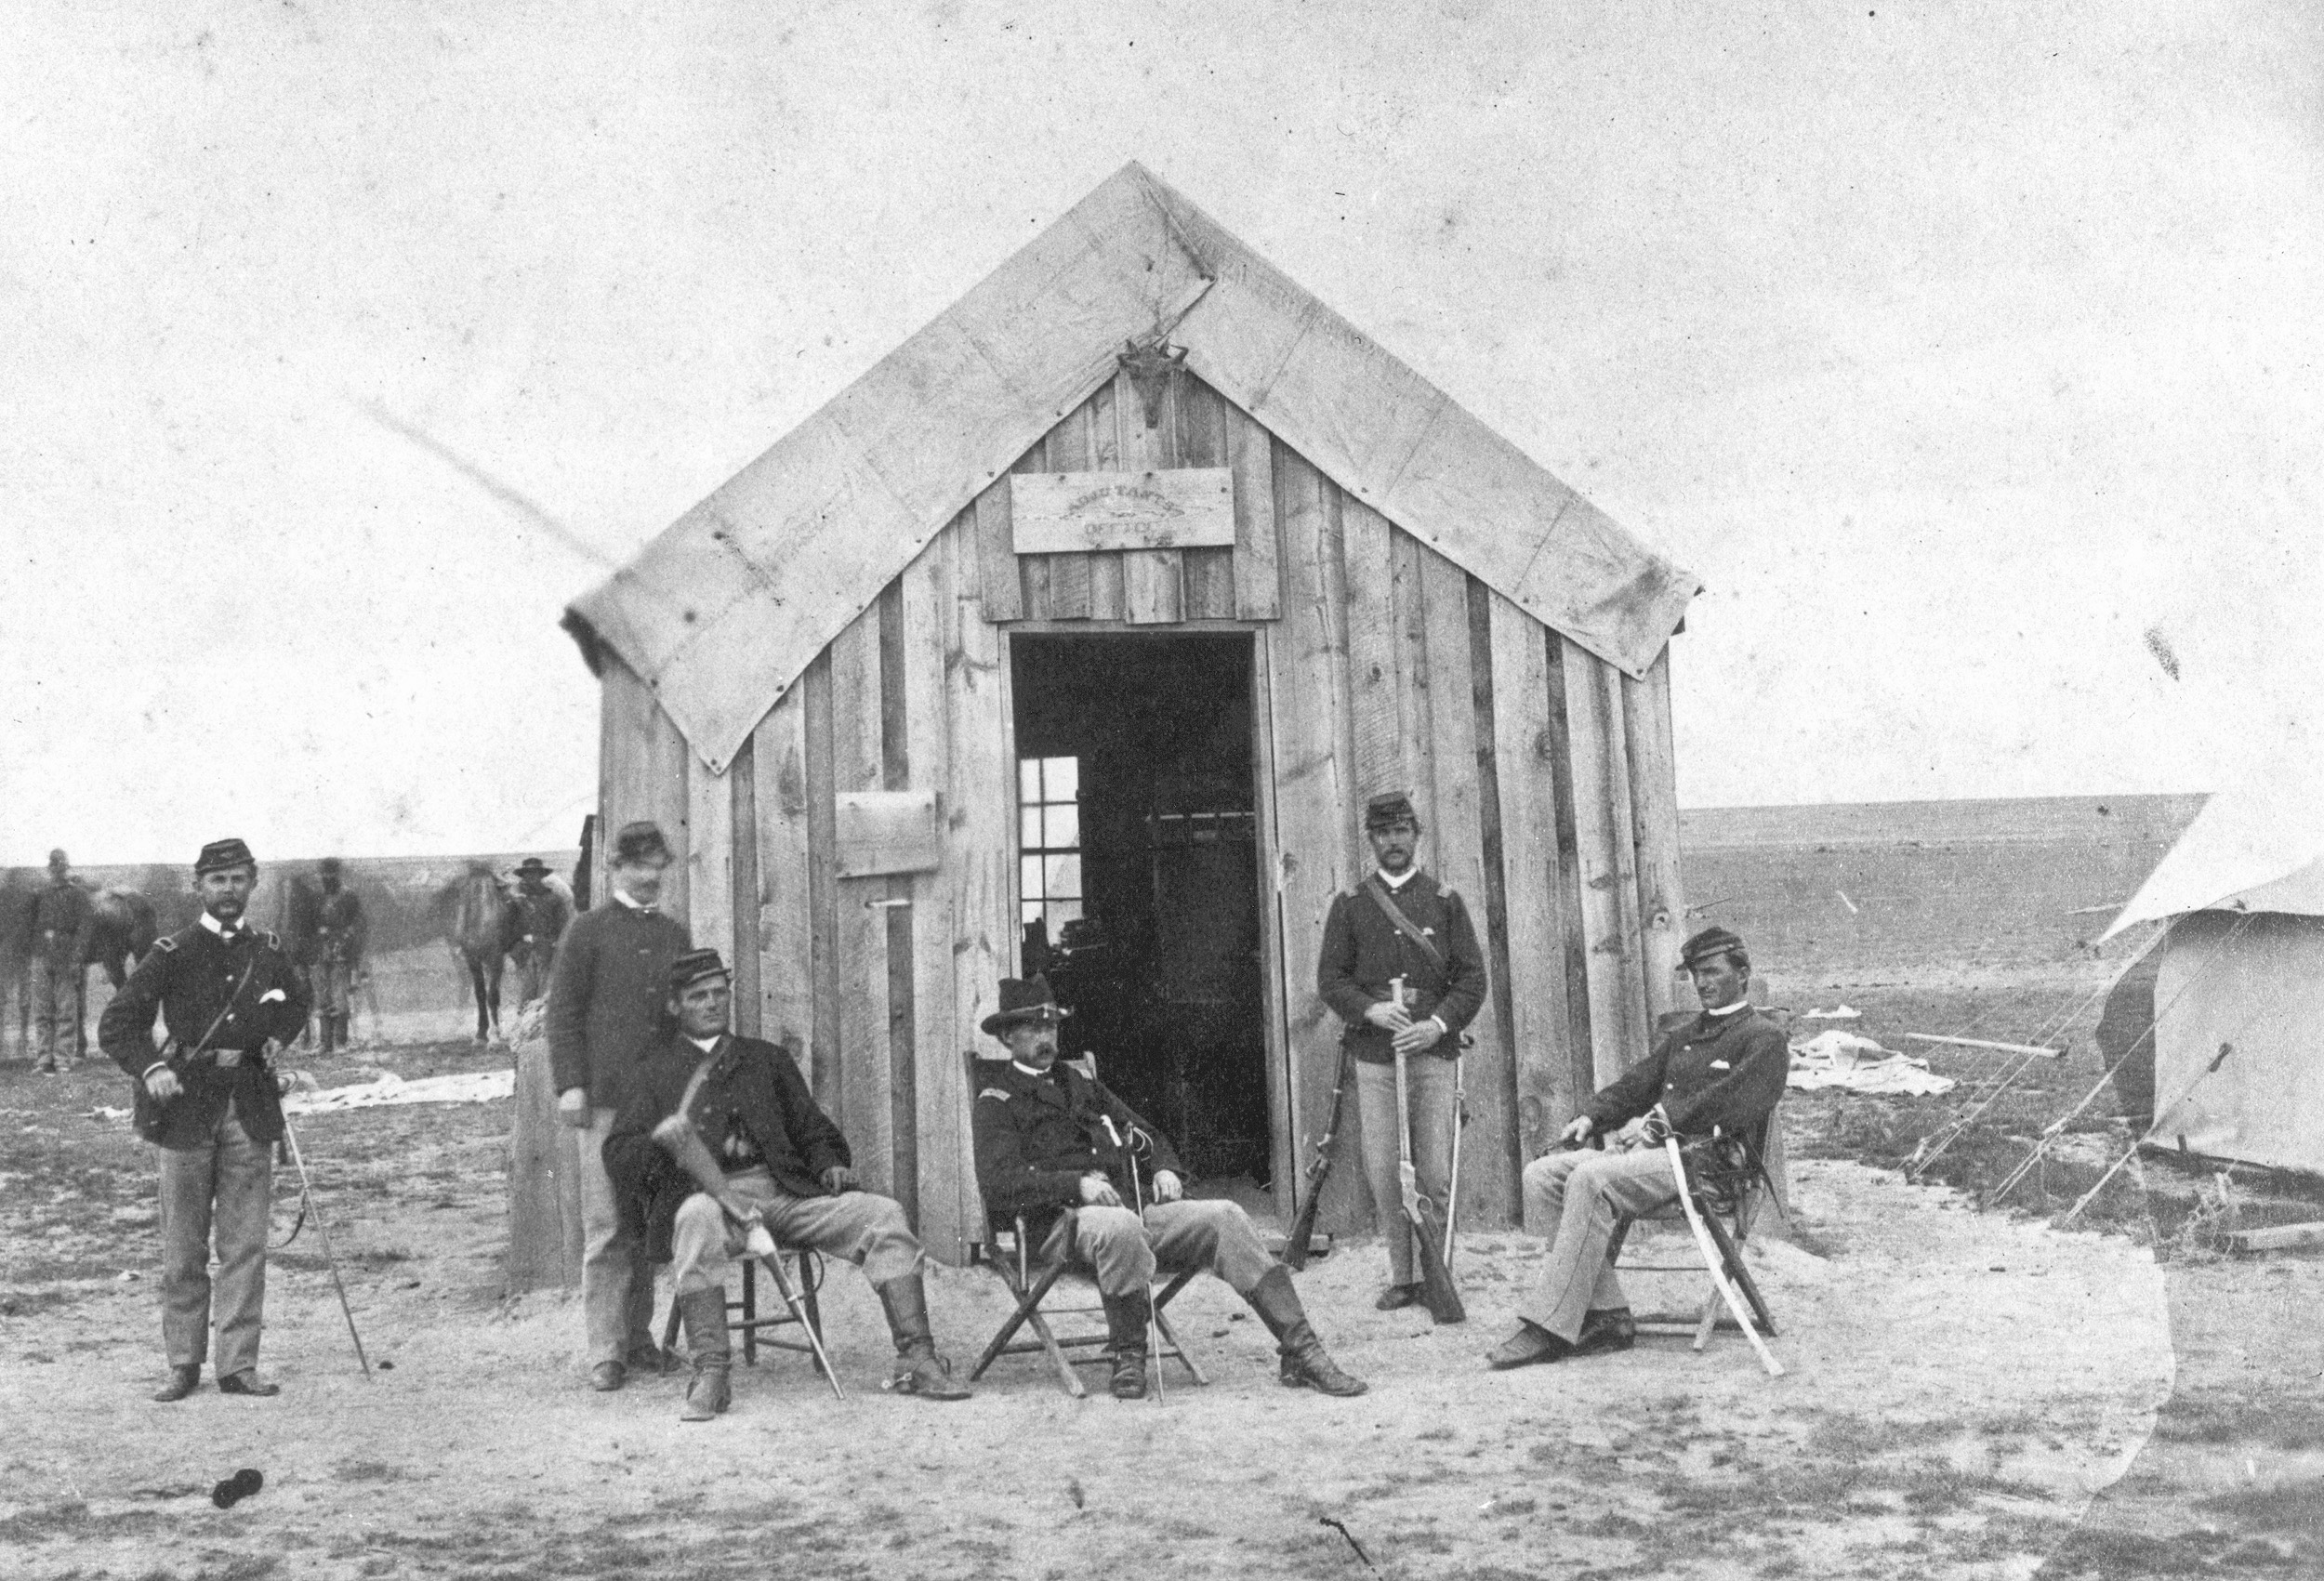 Taken only hours after the desperate fight against the collection of Plains Indians, this photograph by Dr. William A. Bell shows the Fort Wallace adjutant’s office, Captain Barnitz (center), Lieutenant Frederick Beecher (standing right), and other troopers in their fighting gear. 